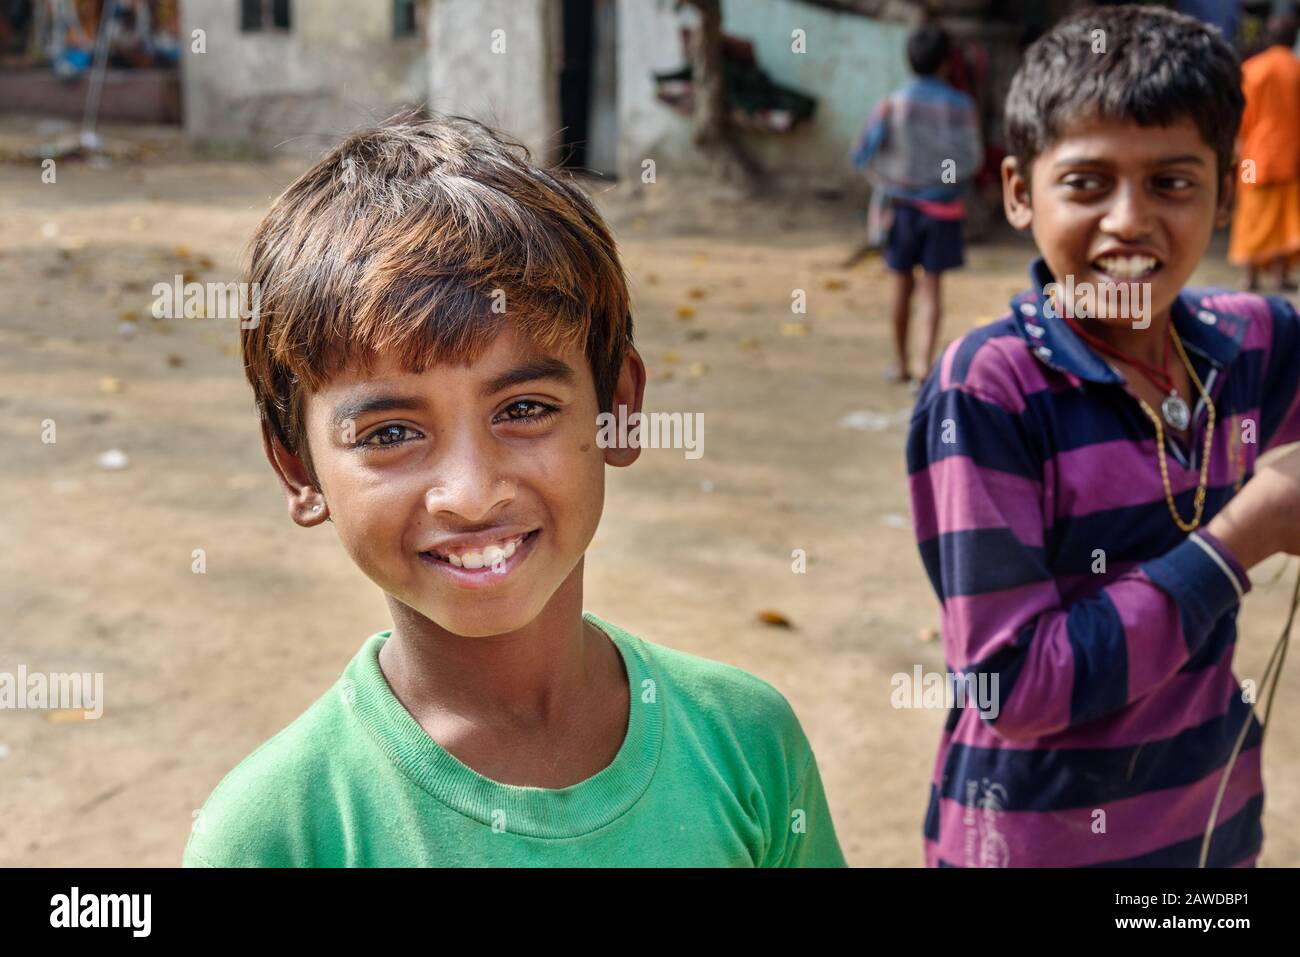 Young boy smiling and happy on the street in Kolkata. India Stock Photo